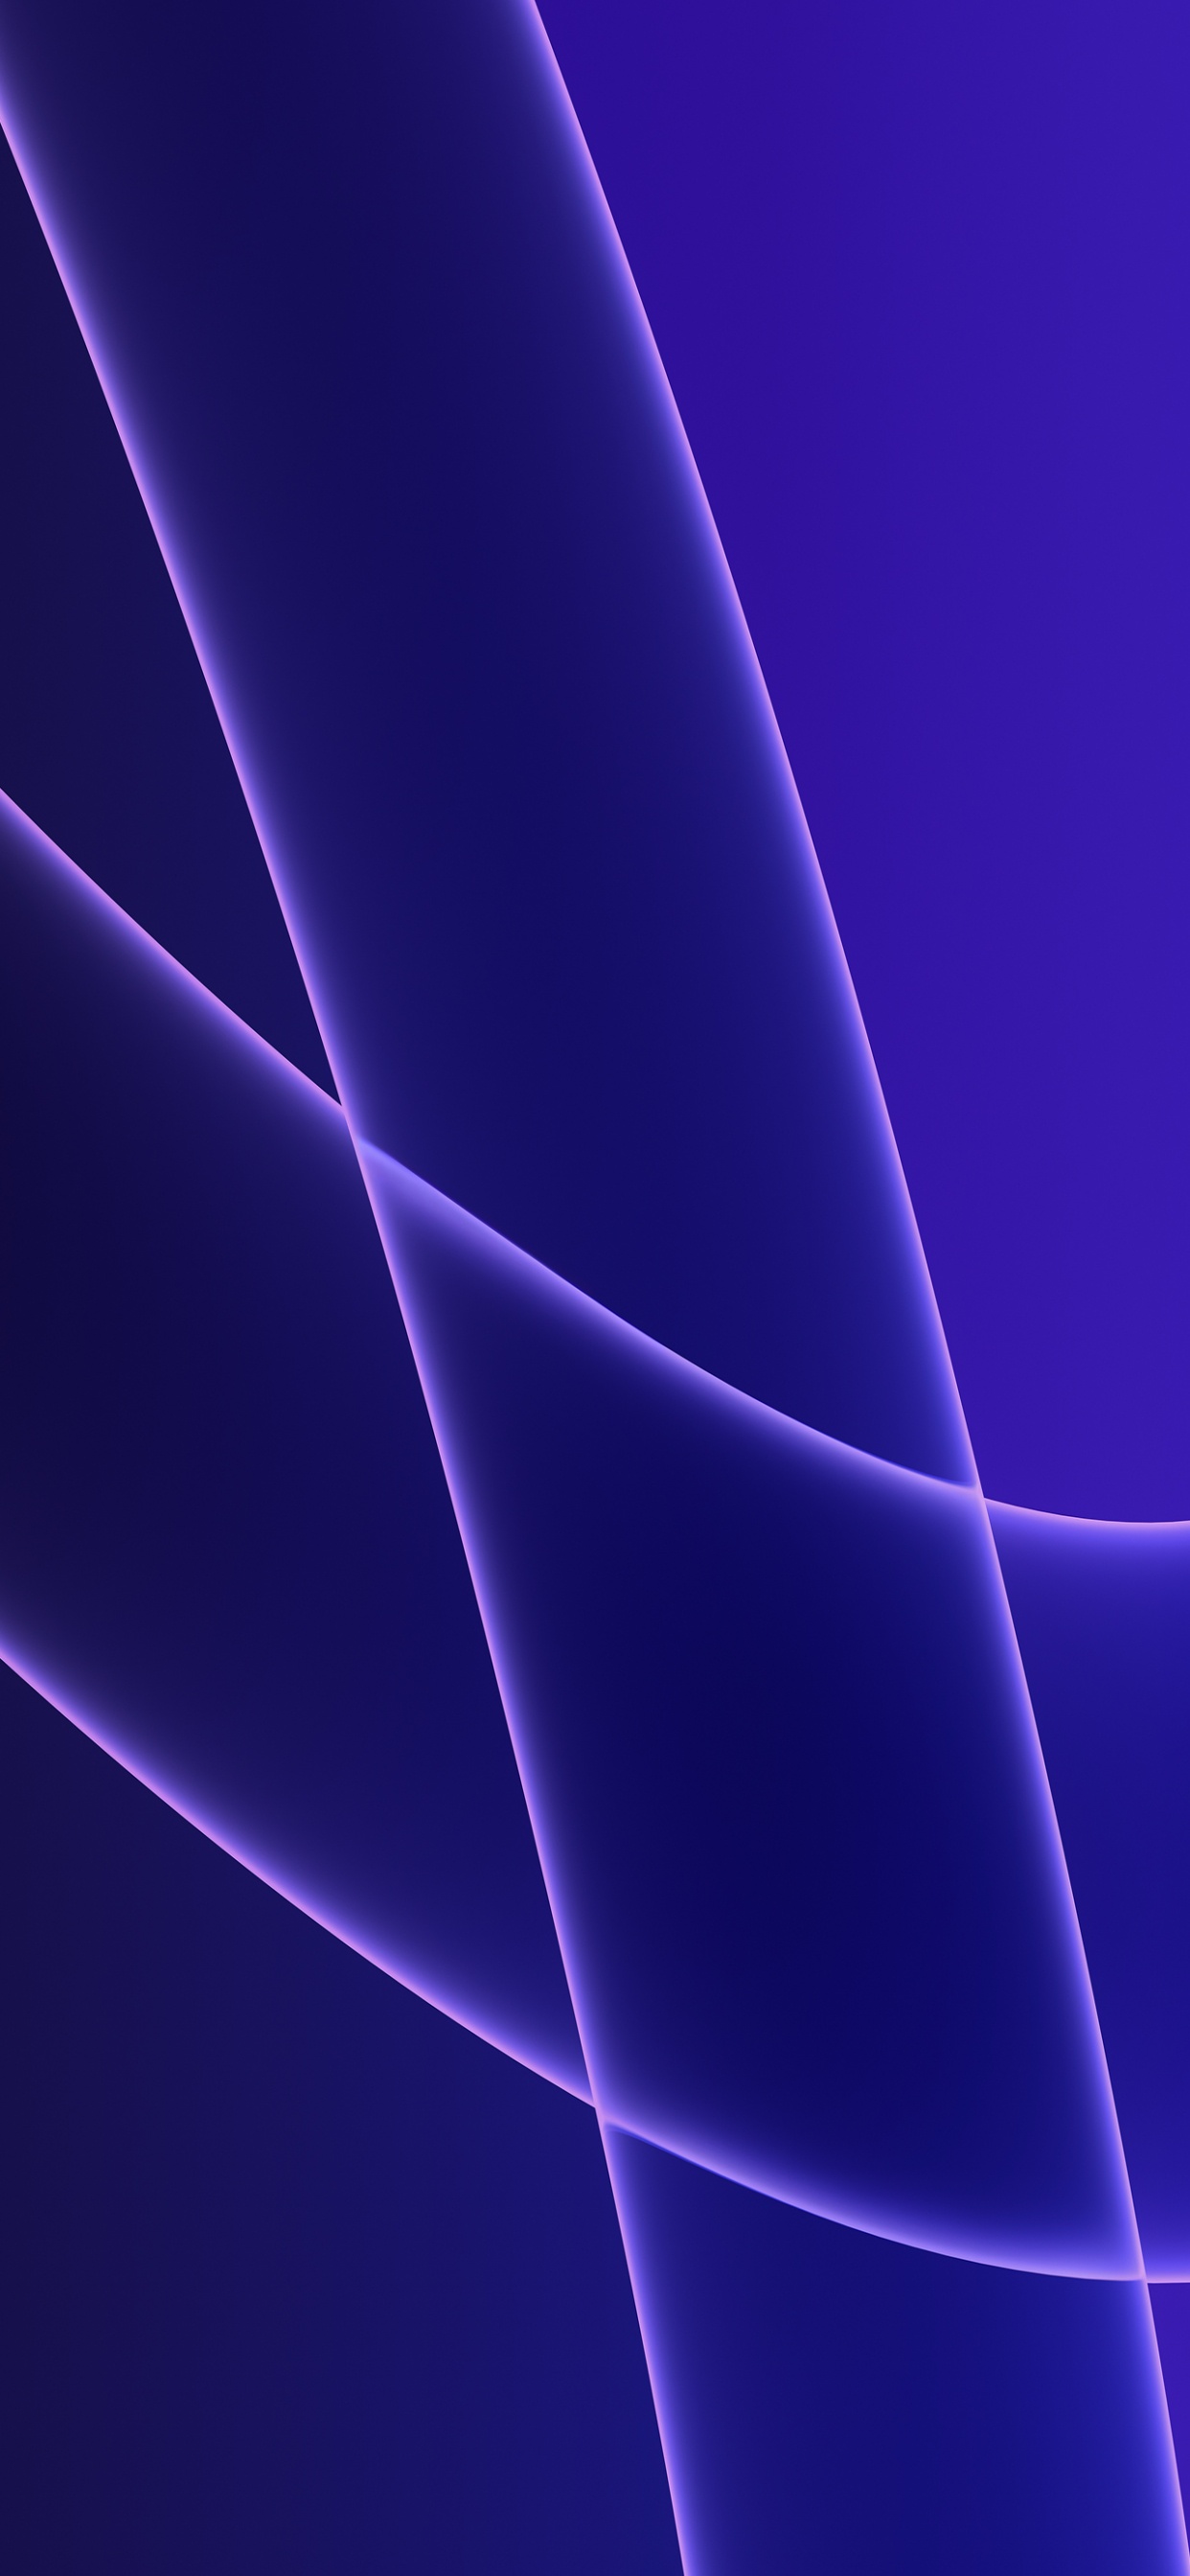 IMac Color Matching Wallpaper in Dark Purple for IPhone. Wallpaper in 1242x2688 Resolution